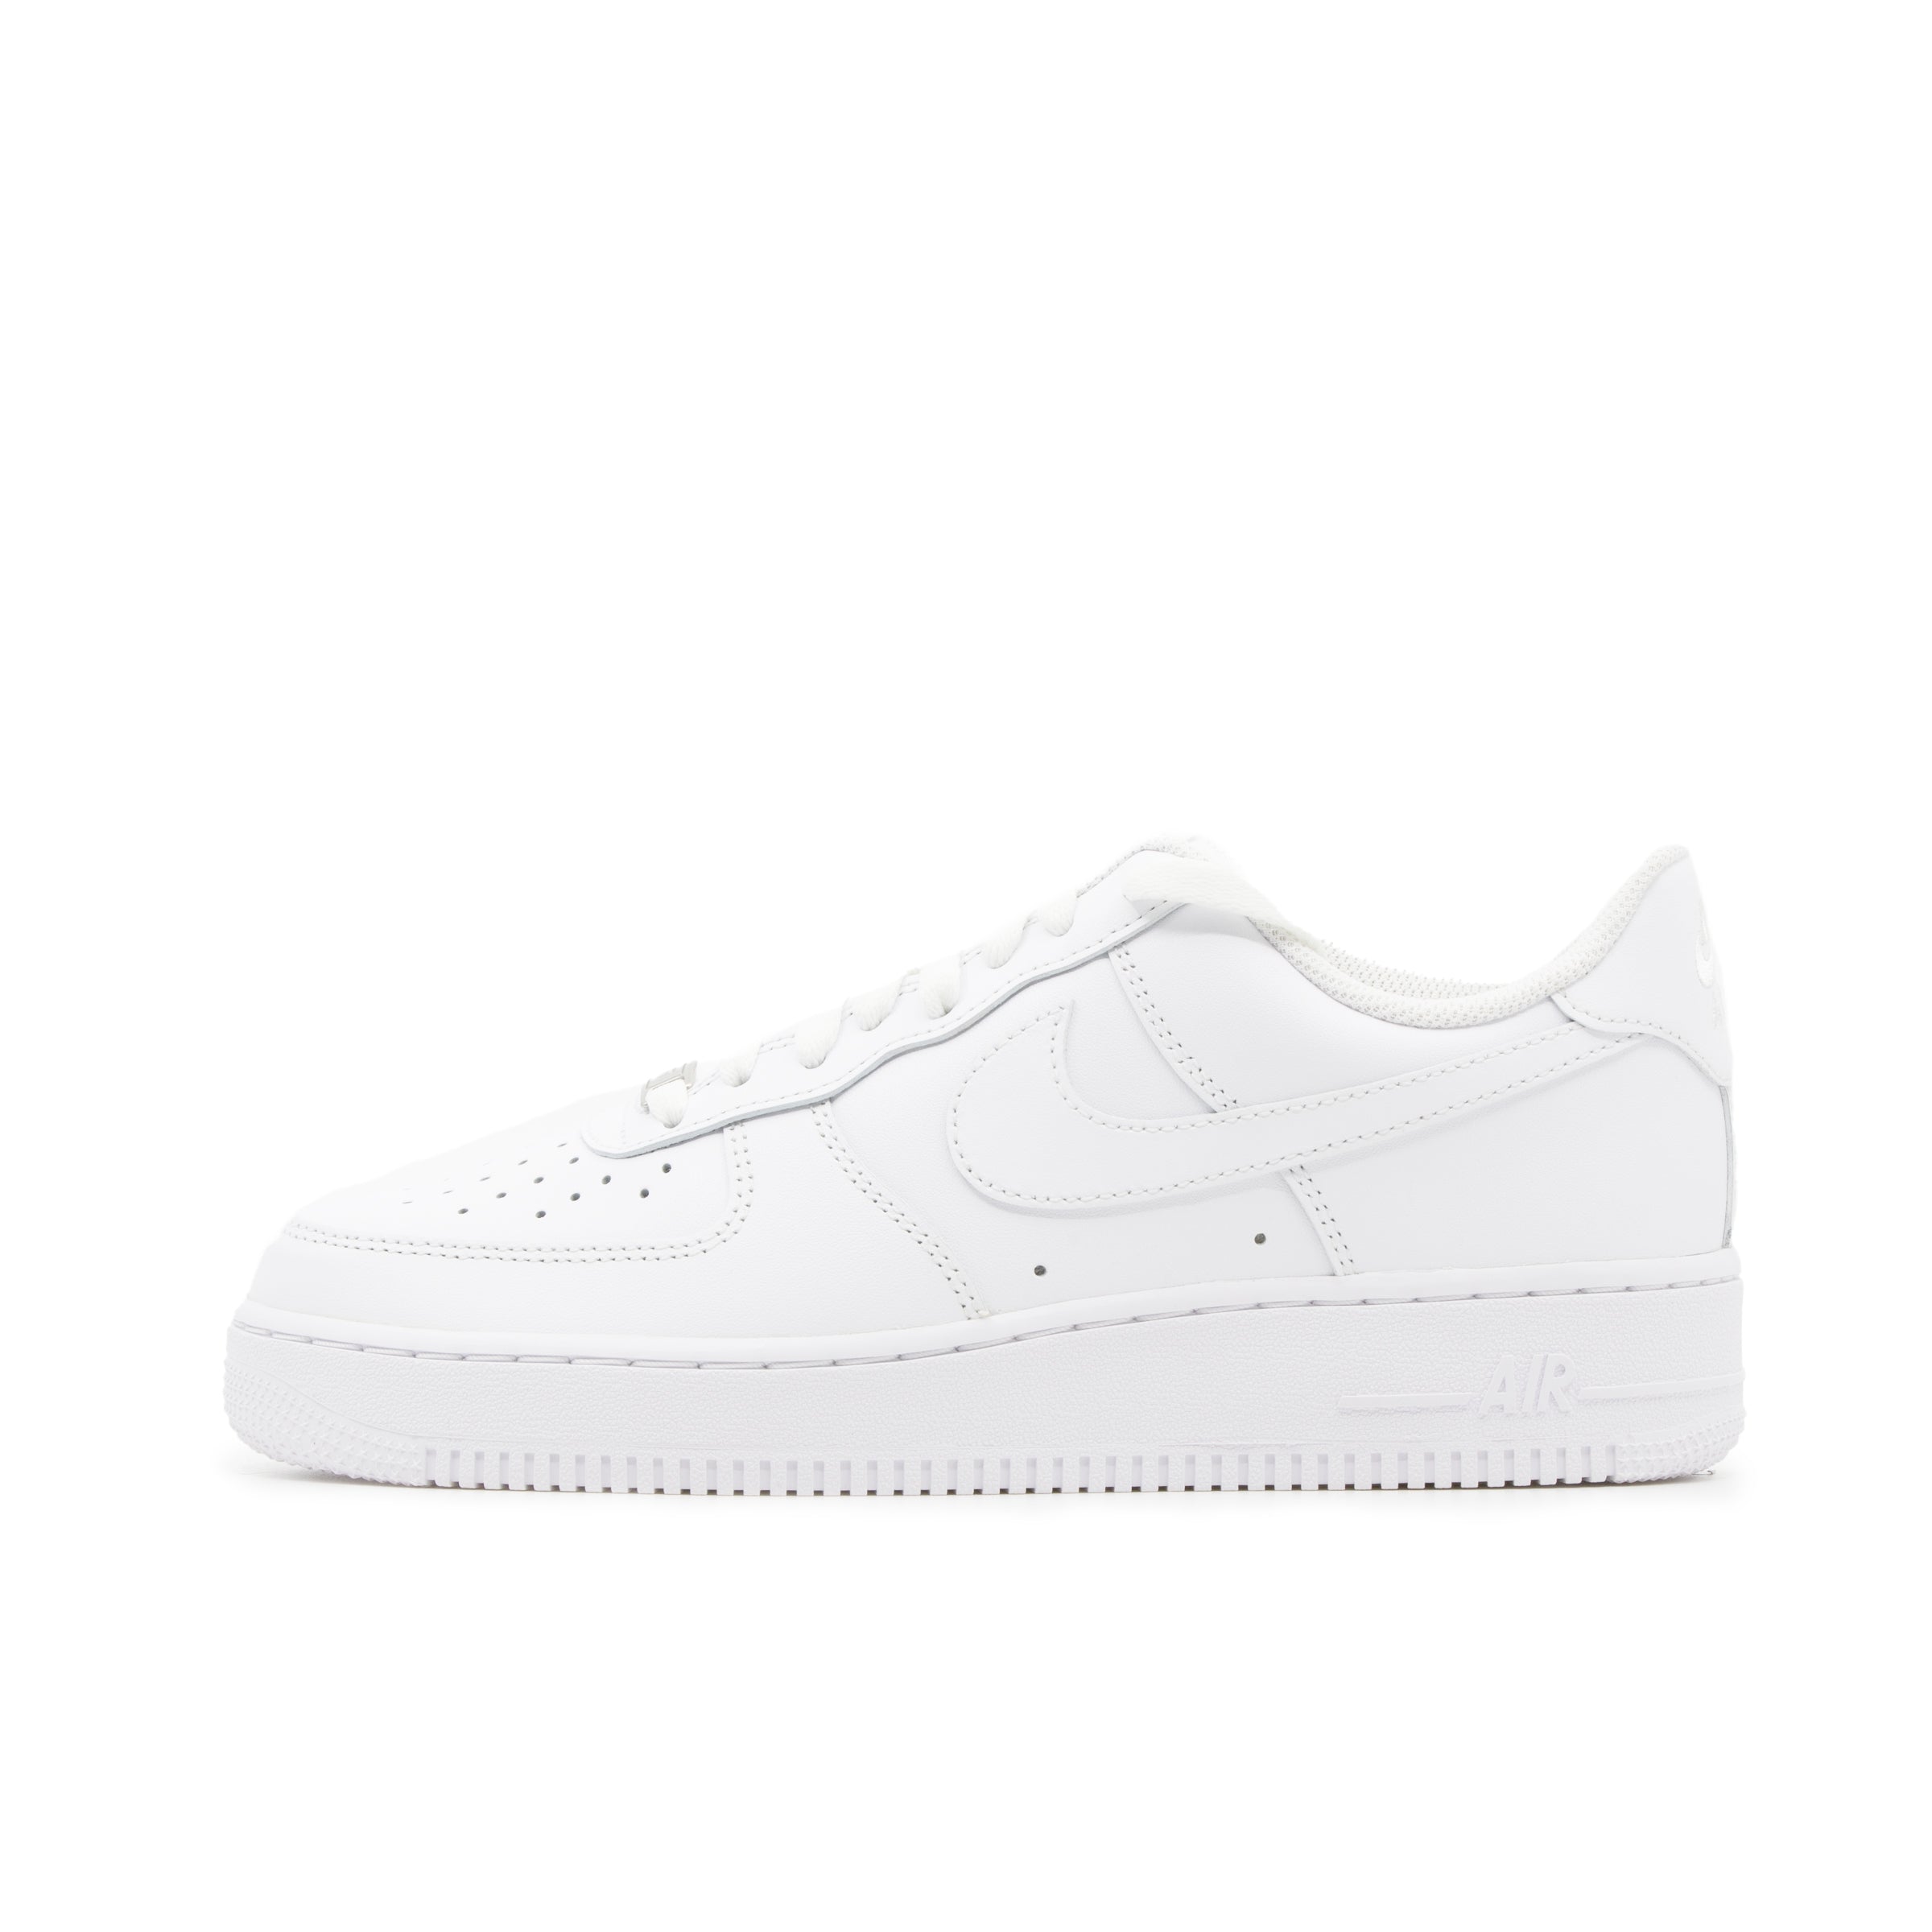 NIKE AIR FORCE 1 LOW GS BLANCO